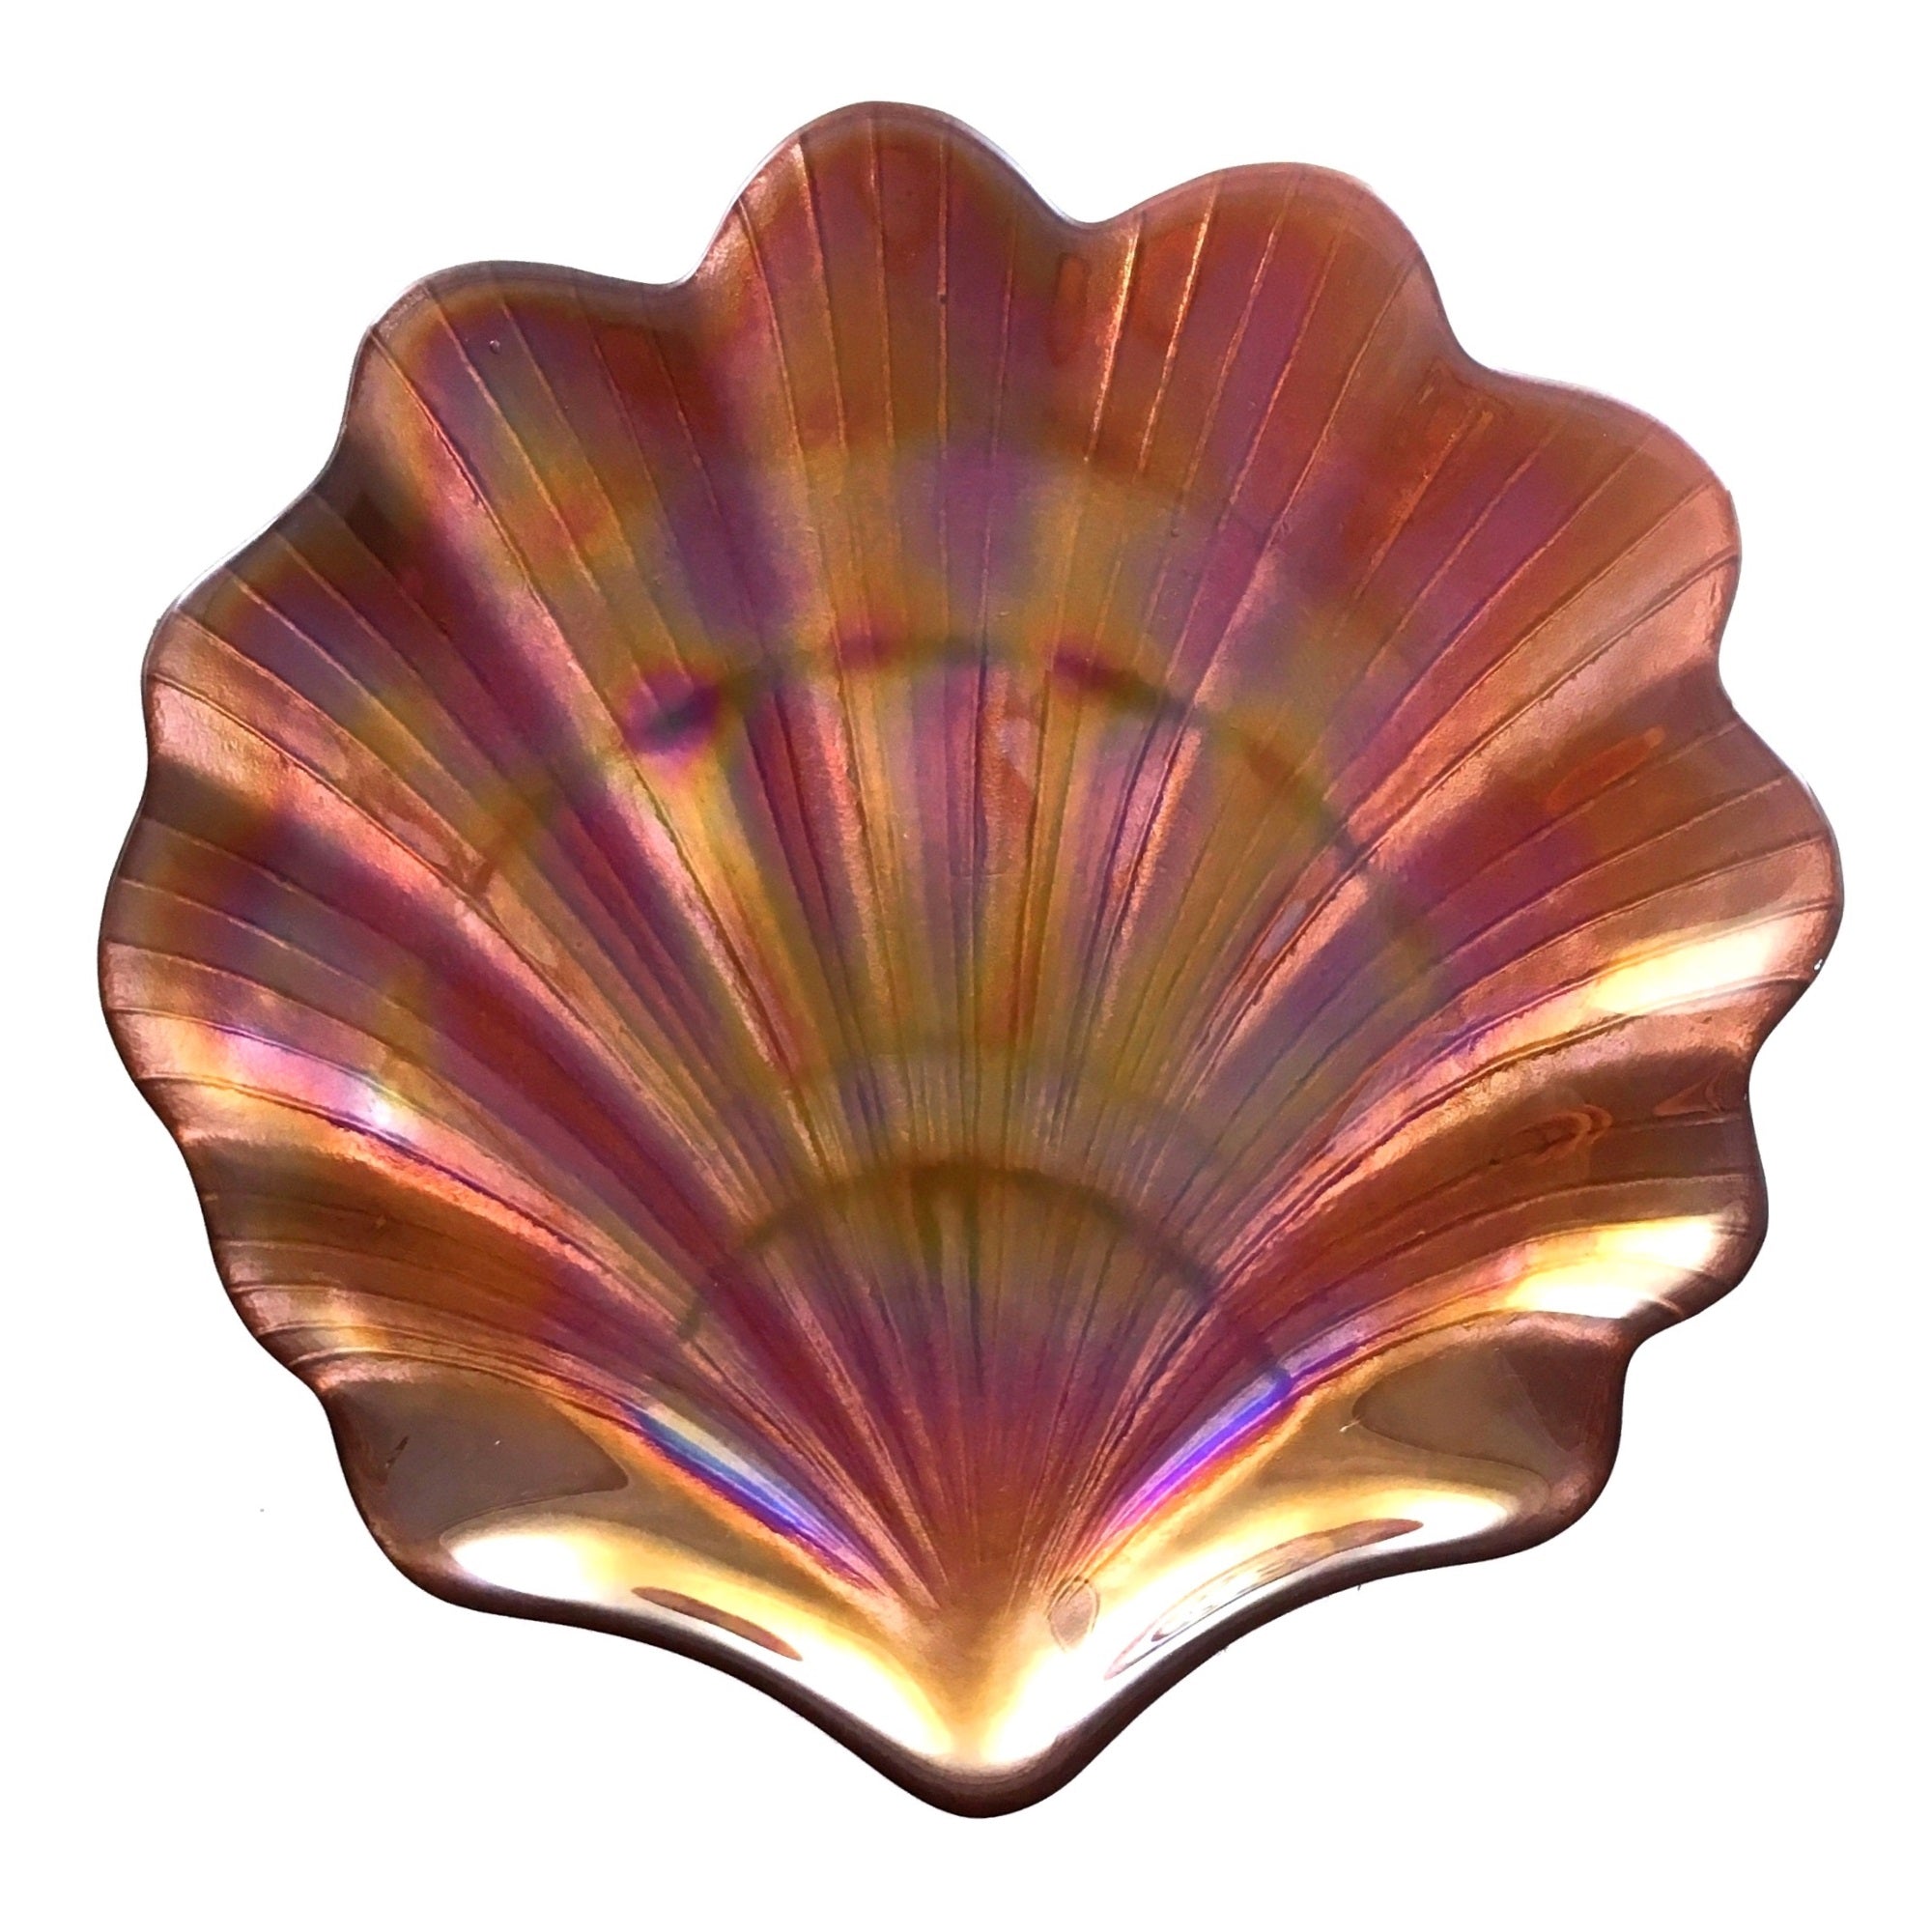 SCALLOP SHELL 8" COPPER LUSTER PLATES - Set of 4